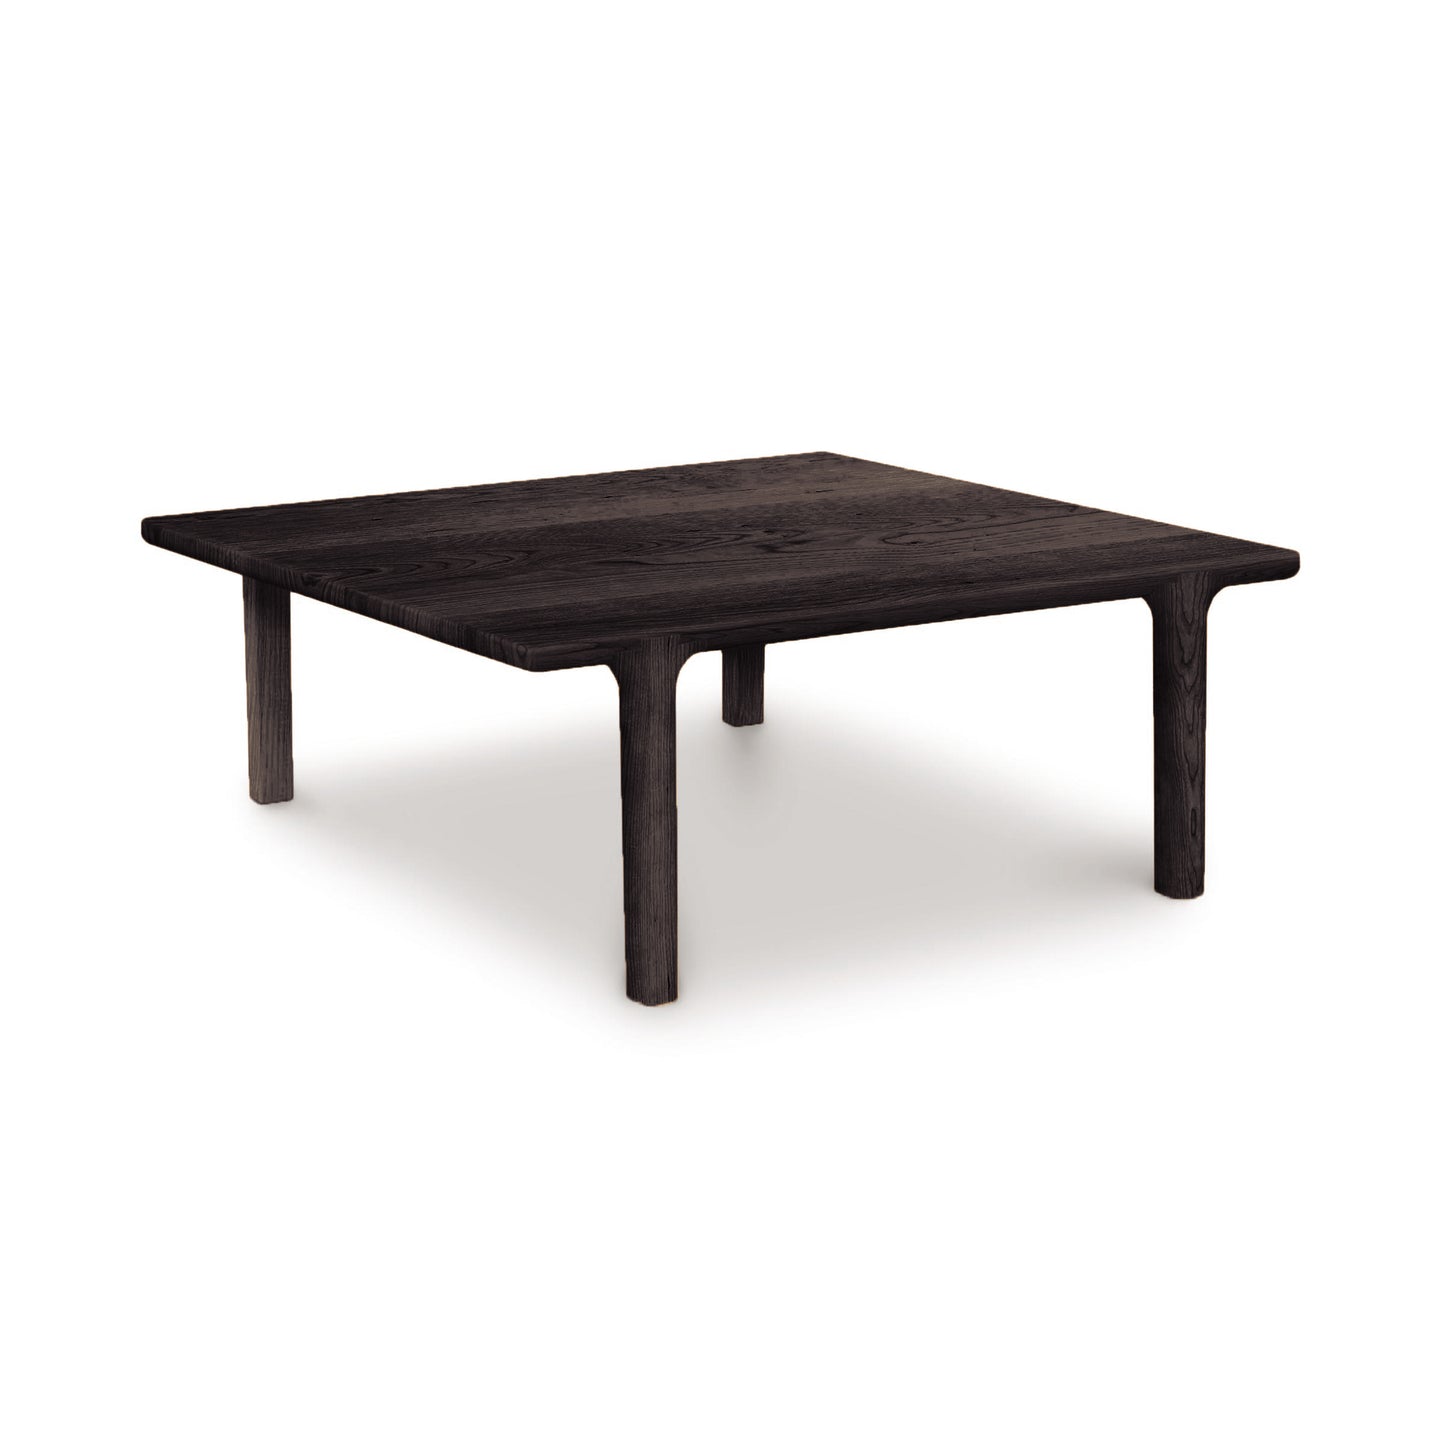 A rectangular, Copeland Furniture Sierra Square Coffee Table crafted from North American hardwood with a minimalist, contemporary design, isolated on a white background.